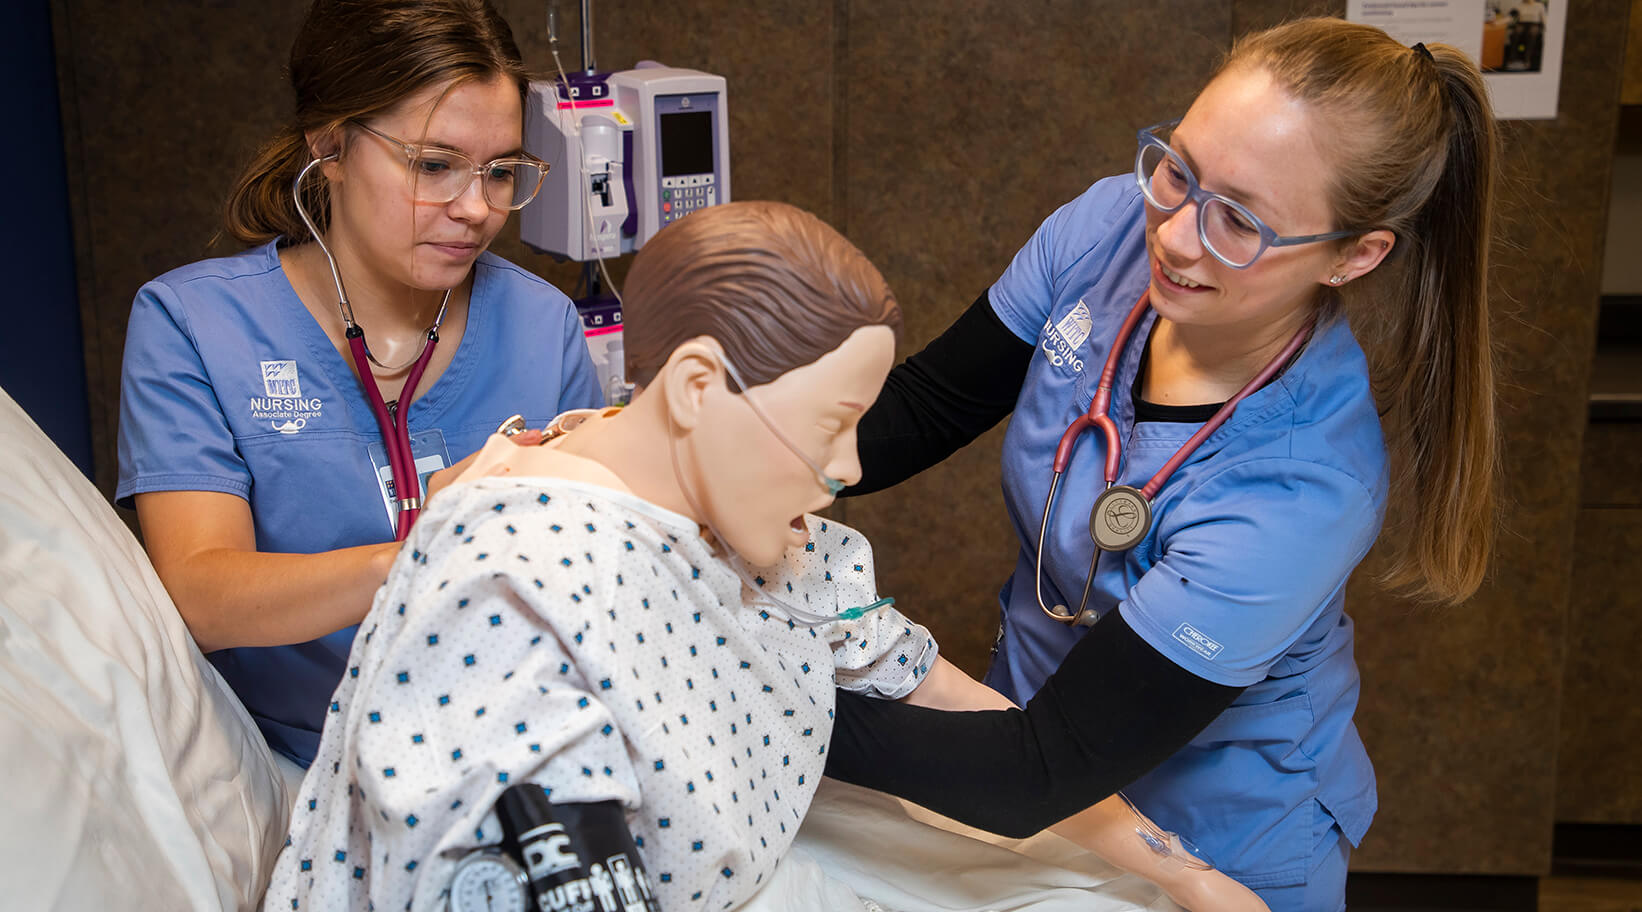 Two students working with a simulated patient